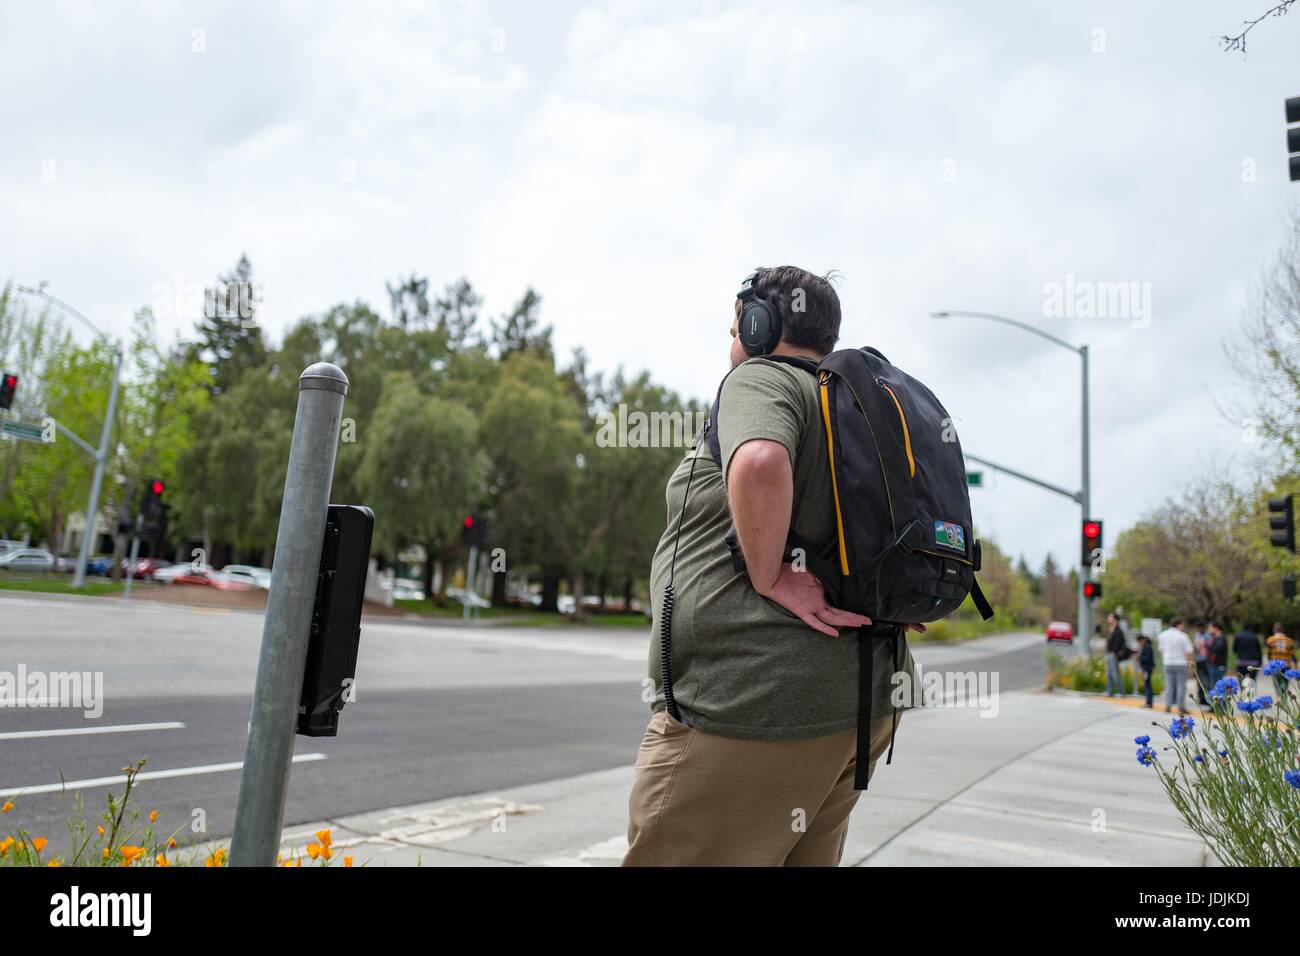 A young male technology worker, wearing headphones and a backpack, stands at an intersection at the Googleplex, the Silicon Valley headquarters of search engine and technology company Google Inc, Mountain View, California, April 7, 2017. Stock Photo